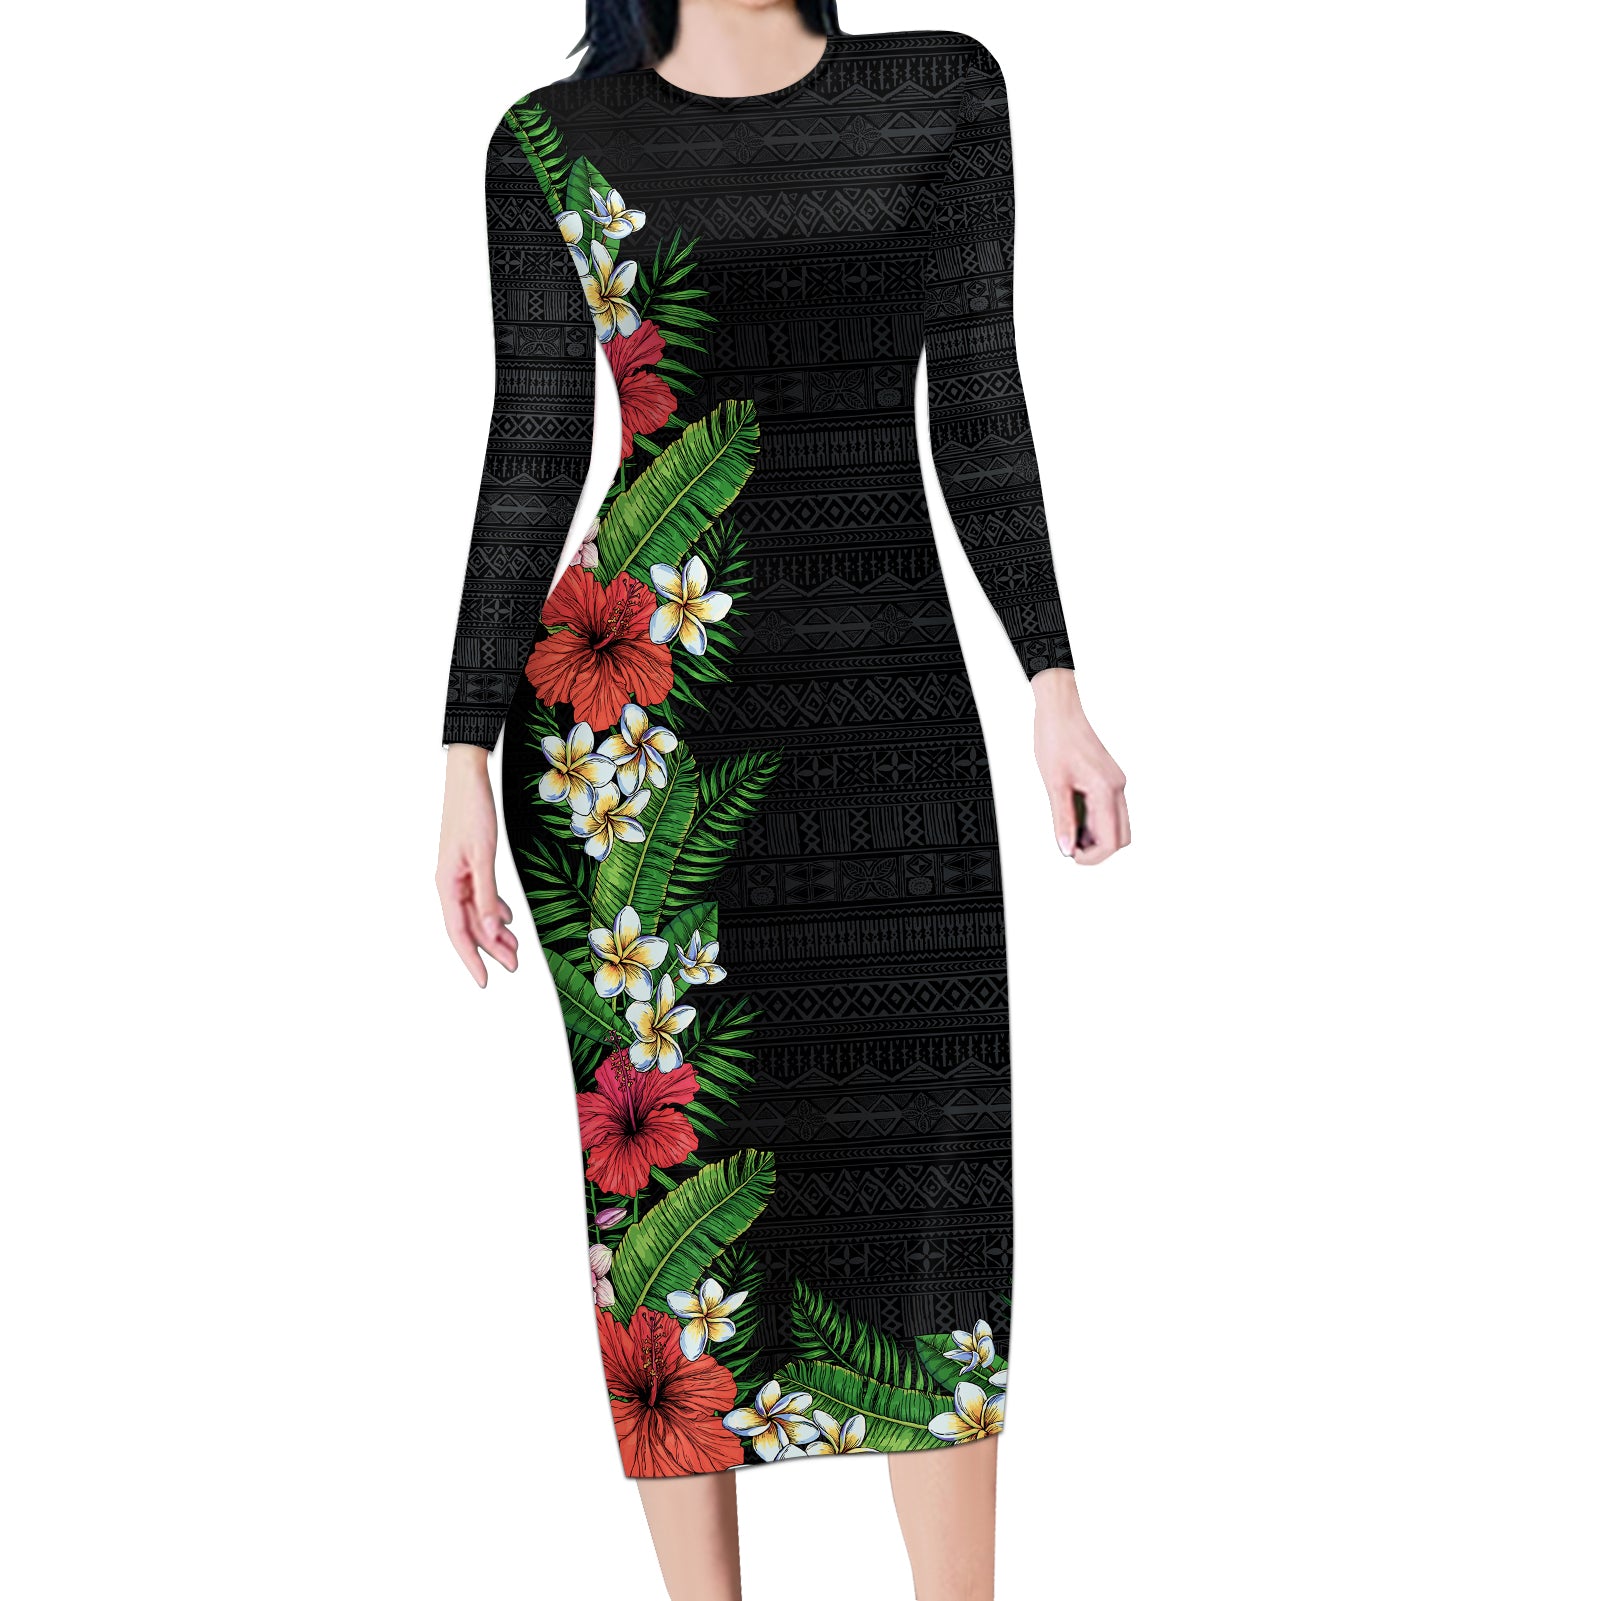 Hawaii Tropical Flowers and Leaves Long Sleeve Bodycon Dress Tapa Pattern Colorful Mode